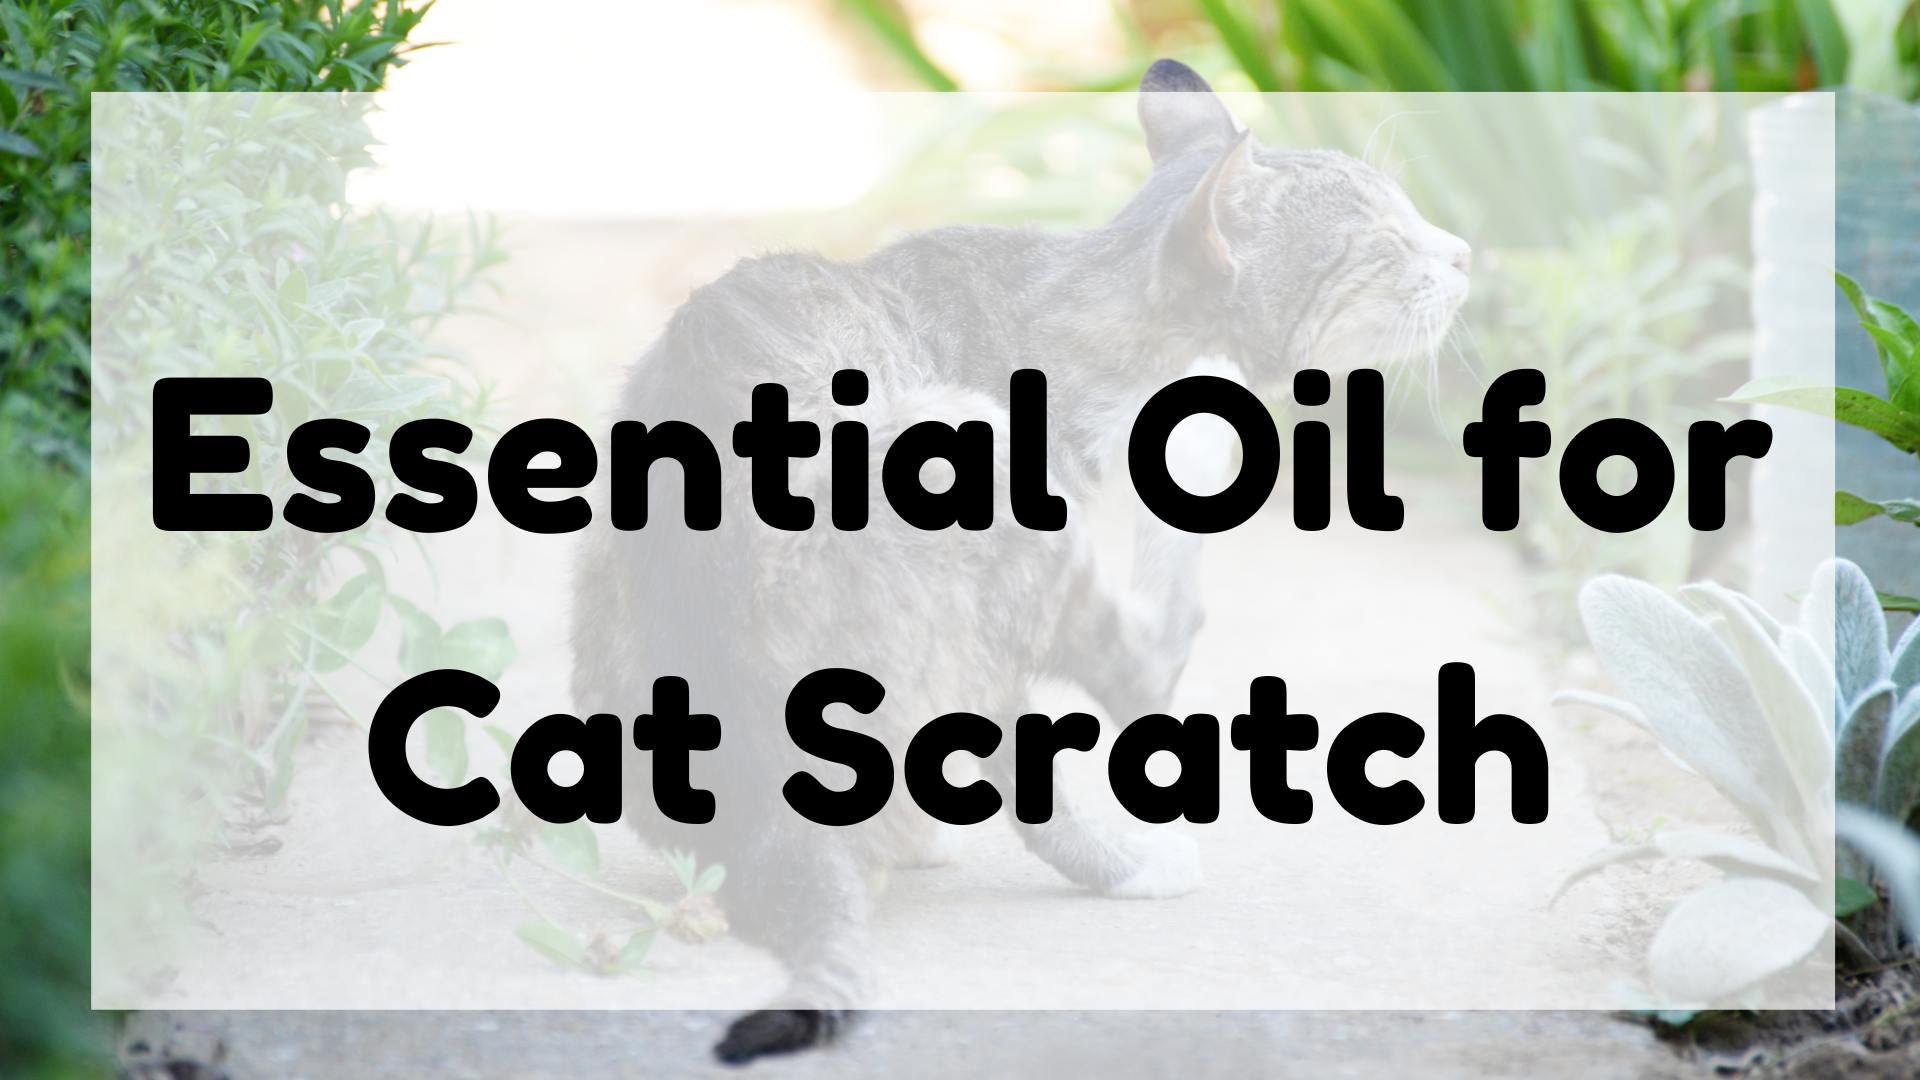 Essential Oil for Cat Scratch featured image